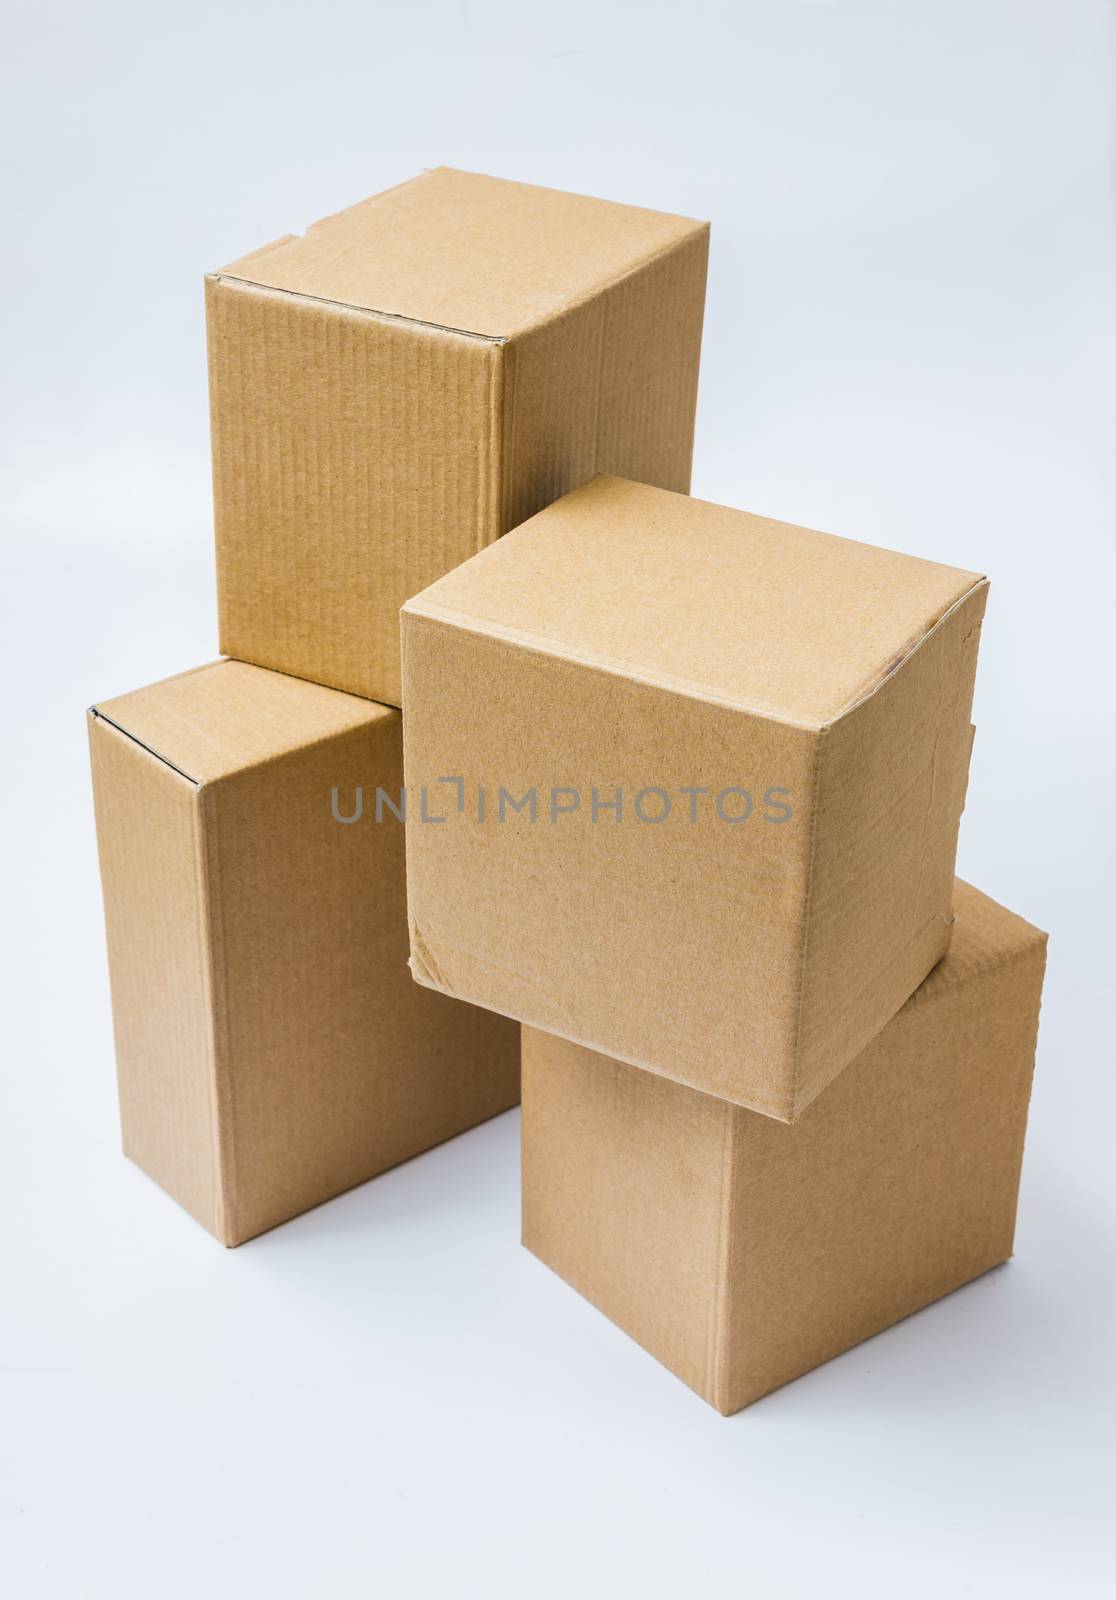 Cardboard boxes for goods and products by oleg_zhukov